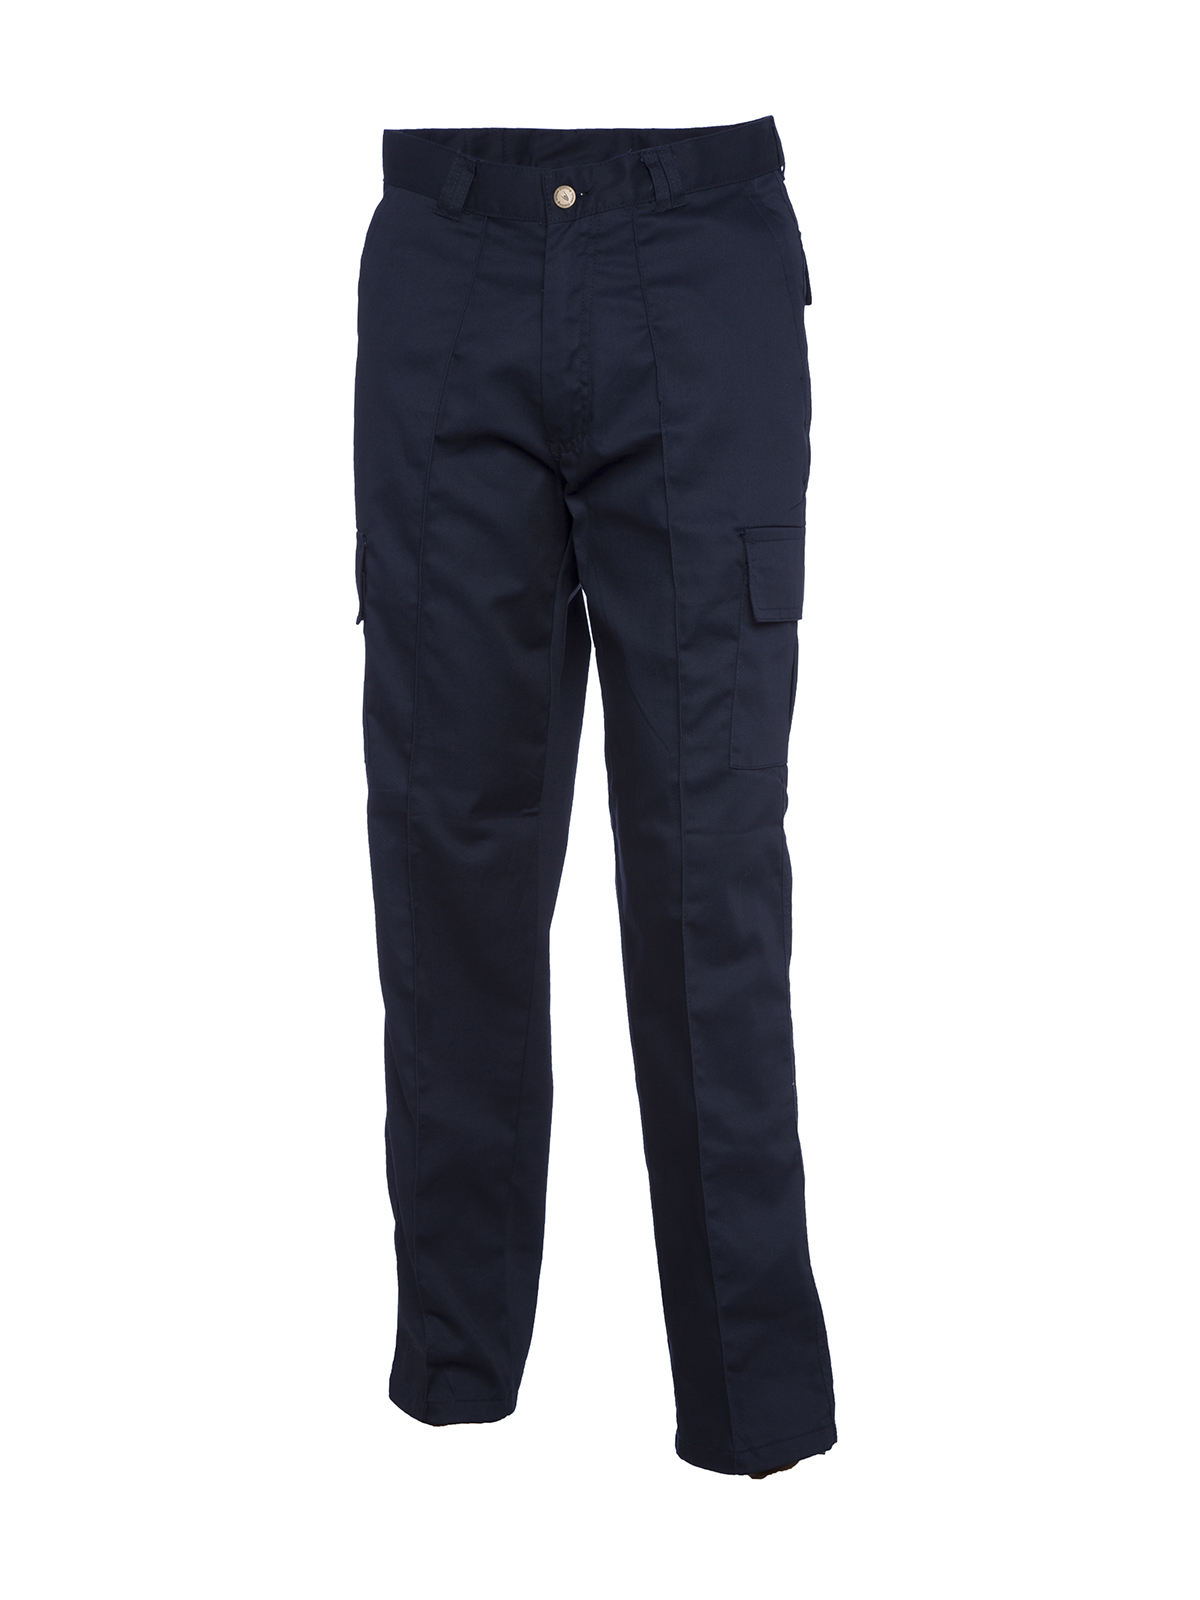 Cargo Trousers, Navy Blue - 34R